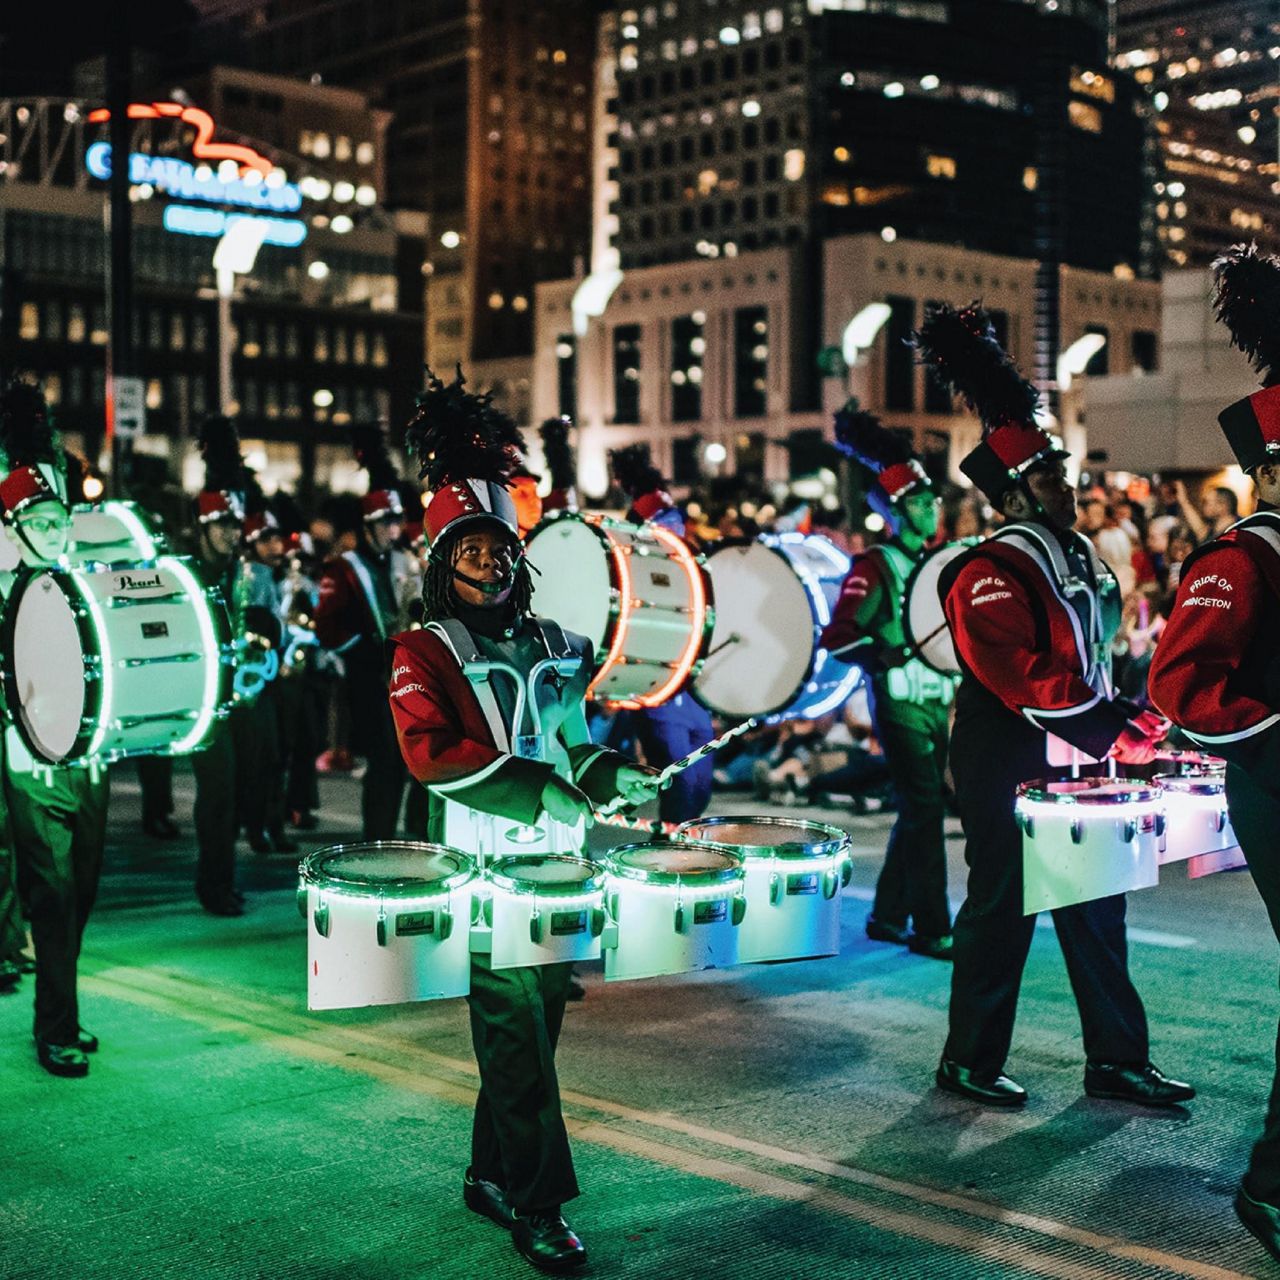 Musicians perform using lit-up instruments during the BLINK Parade. (Photo courtesy of BLINK)